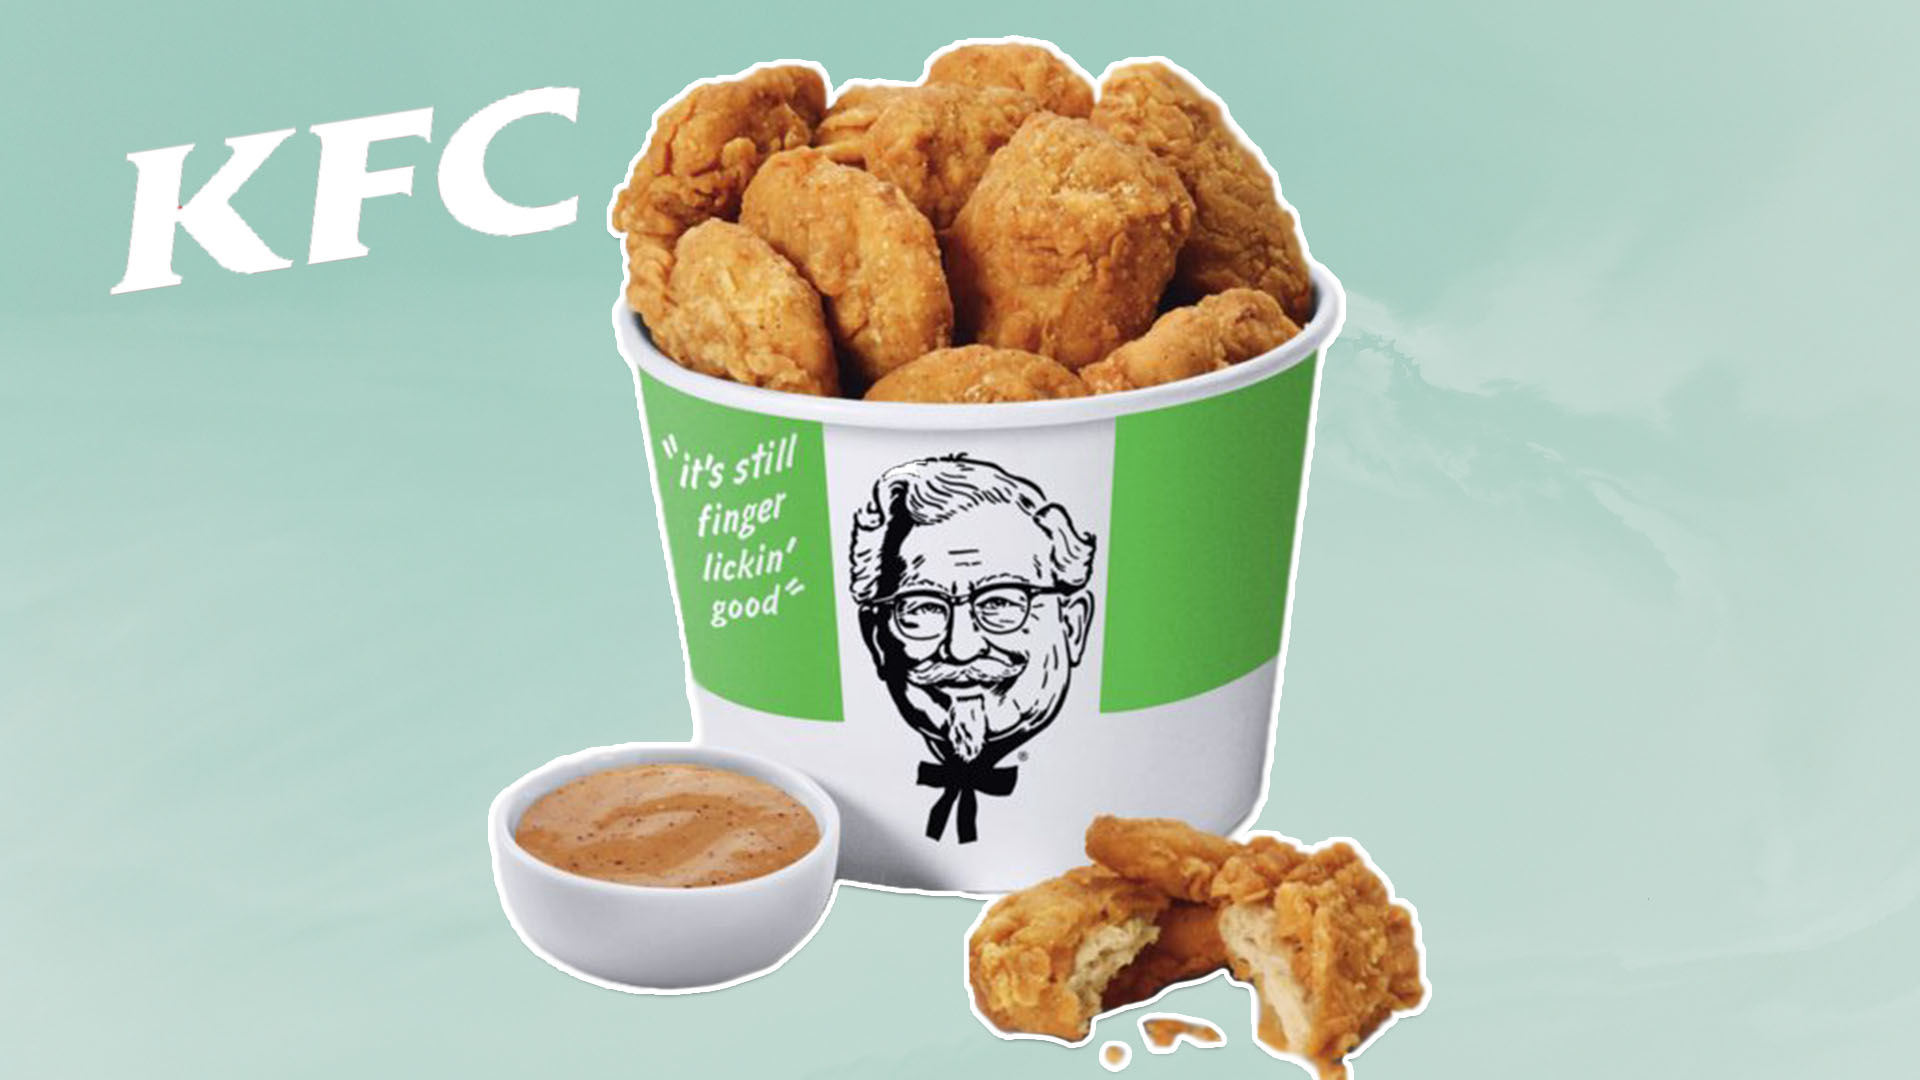 Cargill Is Launching a Vegan Meat Range In China After KFC Success